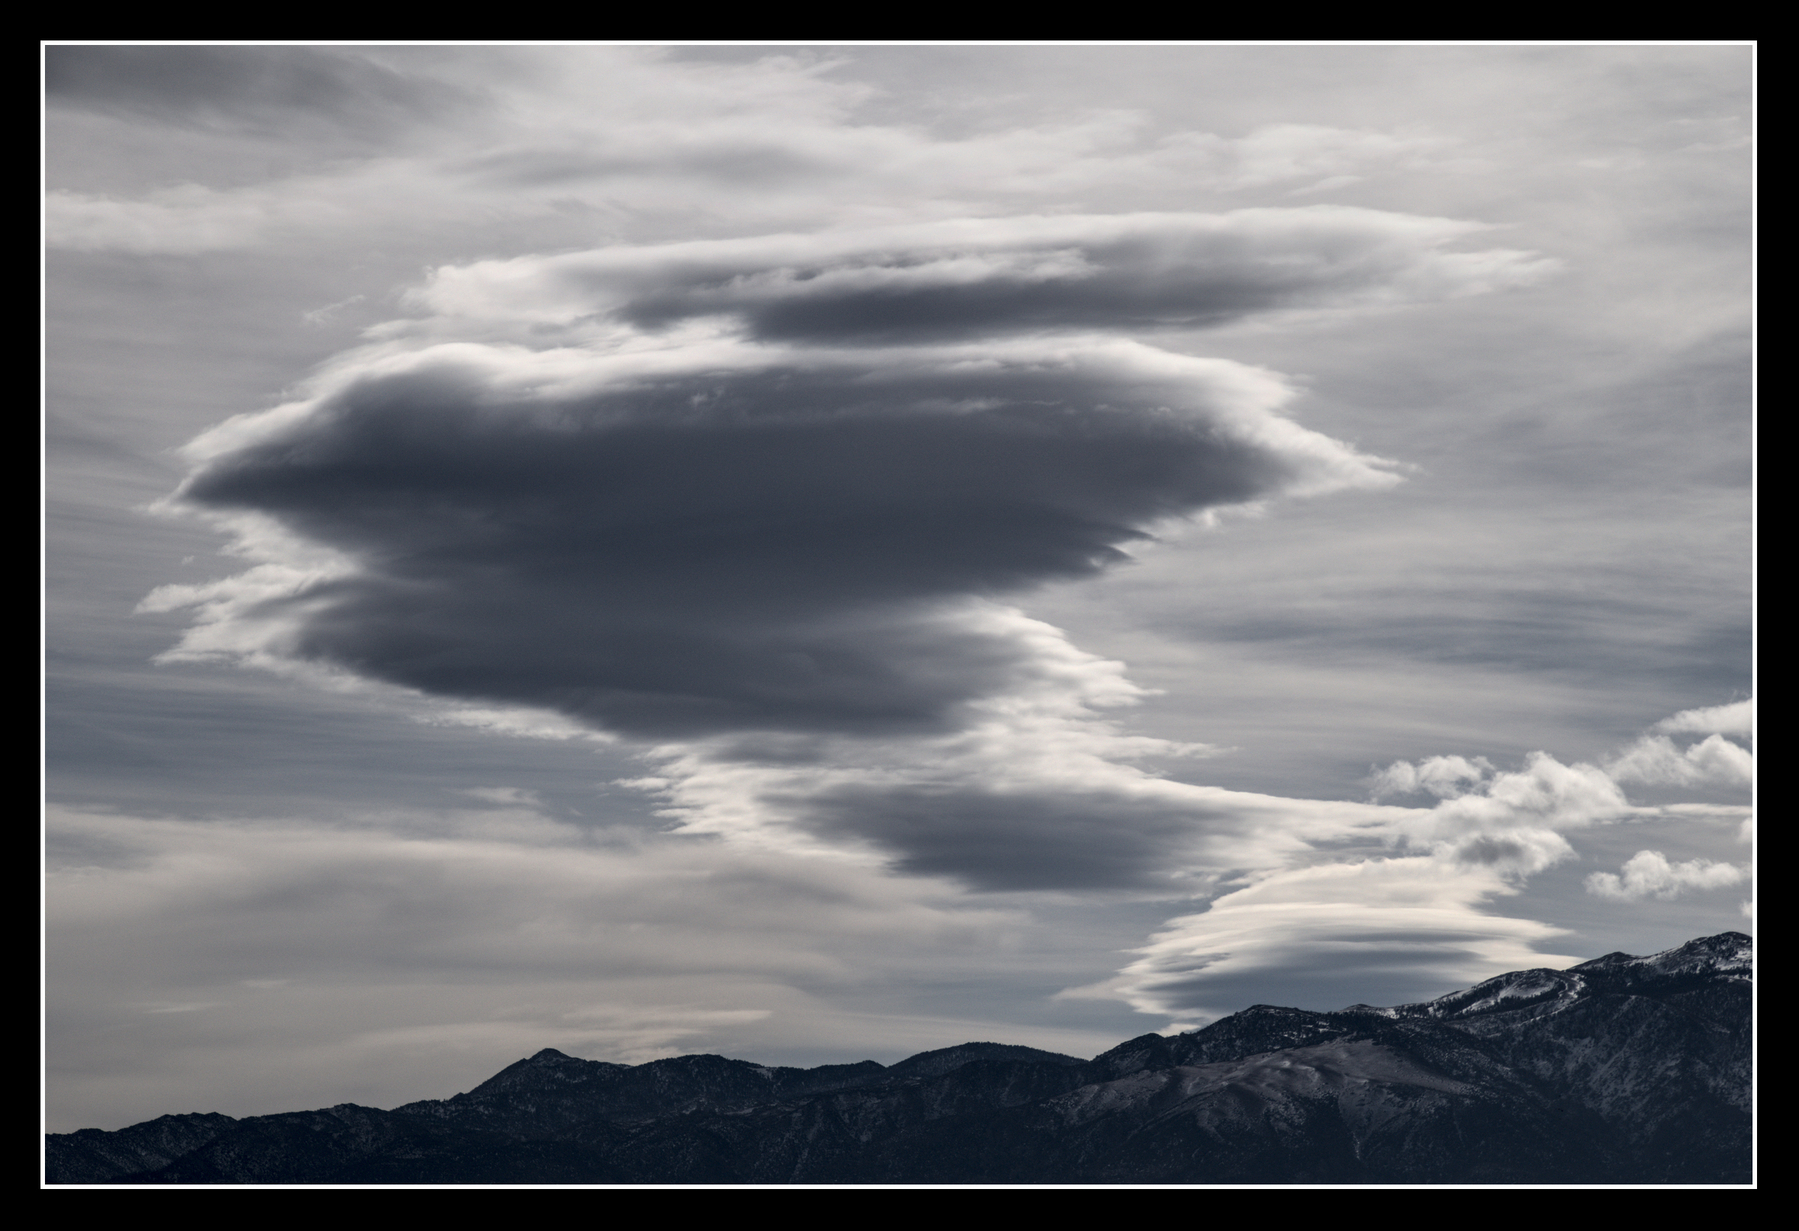 A lenticular cloud rises from a mountain, growing wider as it rises and zig-zags, making it look like a classic genie emerging from a bottle.